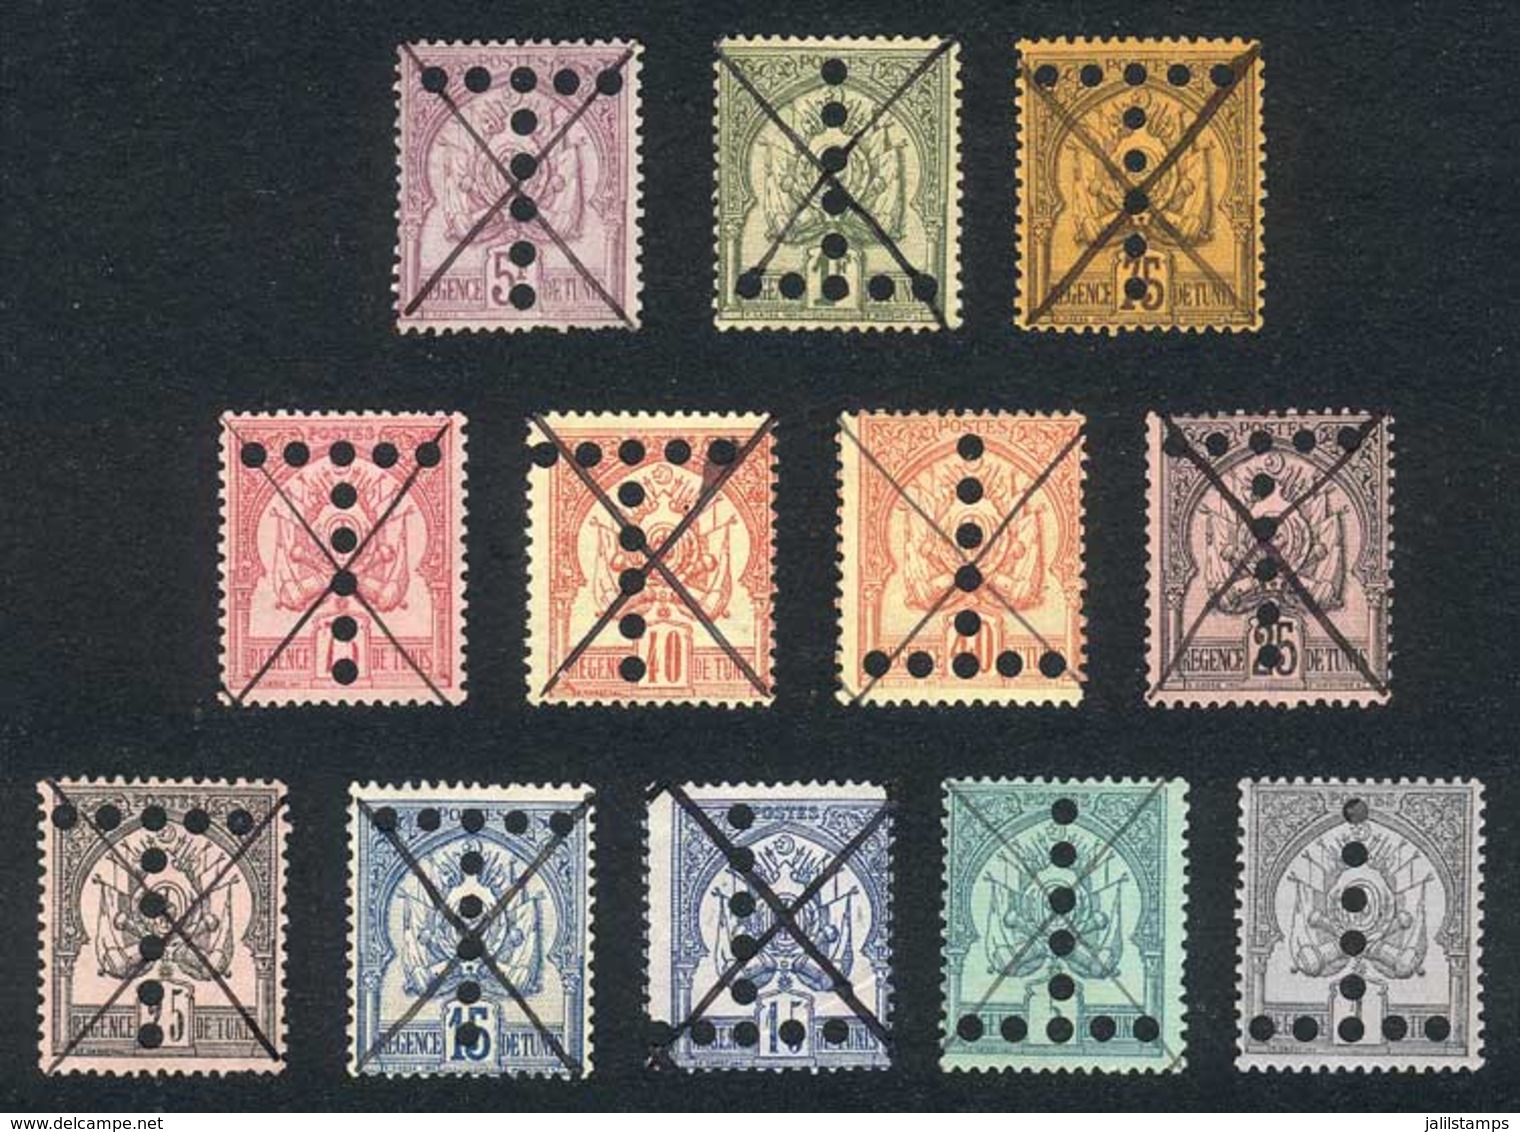 TUNISIA: Lot Of Old Postage Due Stamps, Used Or Mint Without Gum, Excellent Quality, Yvert Catalog Value Euros 400. - Tunisia